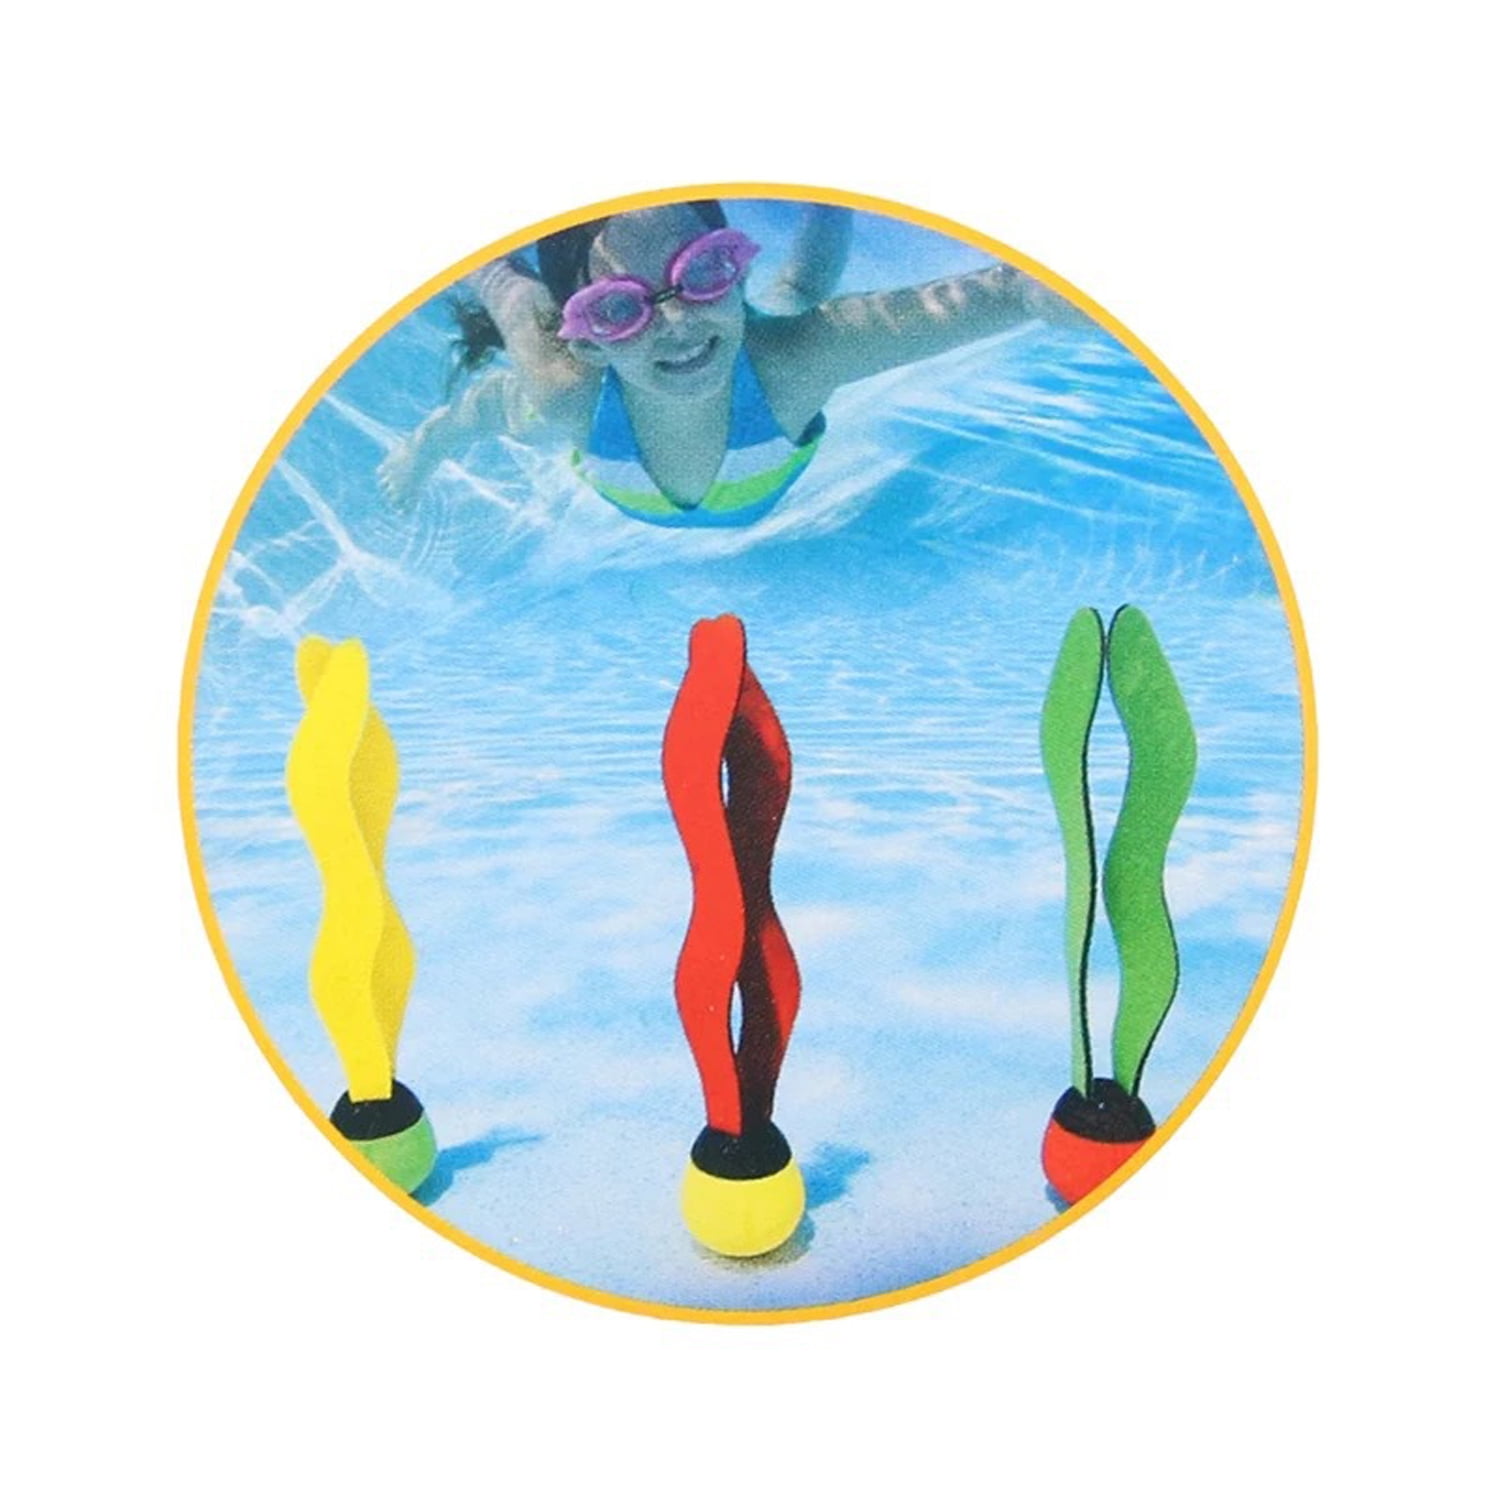 Details about   22Pcs Diving Toys Underwater Sinking Swimming Pool Kid Summer Ring Ball Fish Rod 